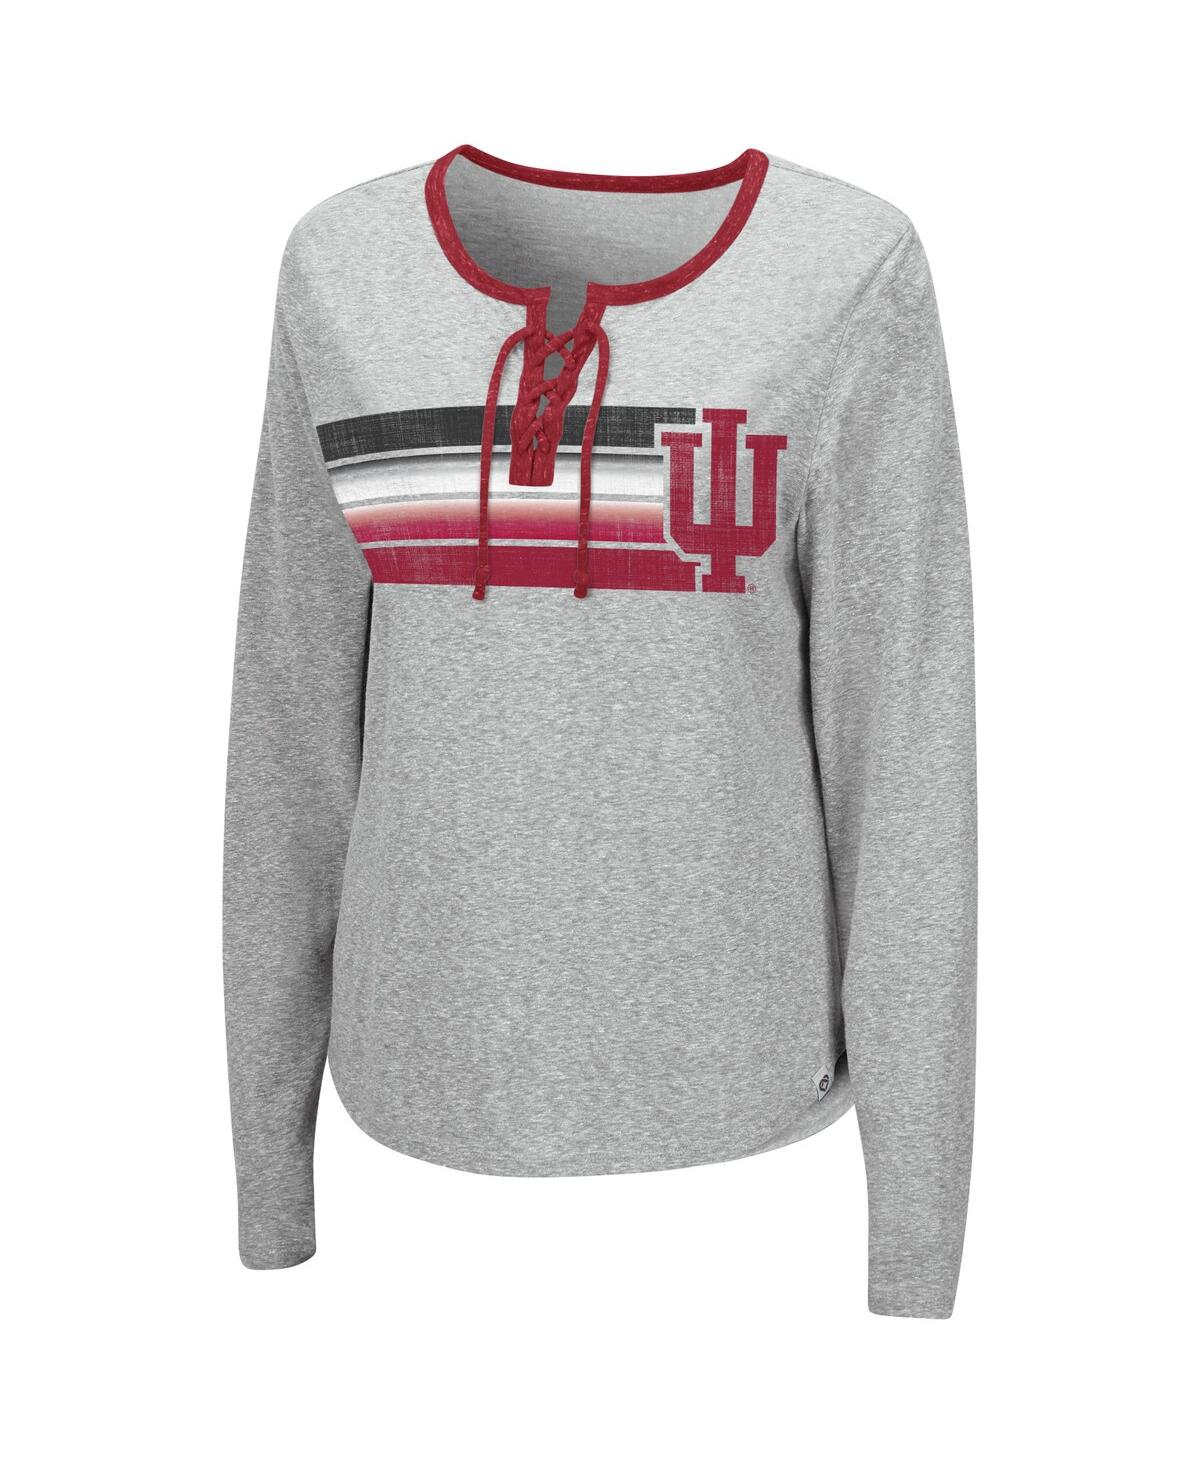 Shop Colosseum Women's  Heathered Gray Indiana Hoosiers Sundial Tri-blend Long Sleeve Lace-up T-shirt